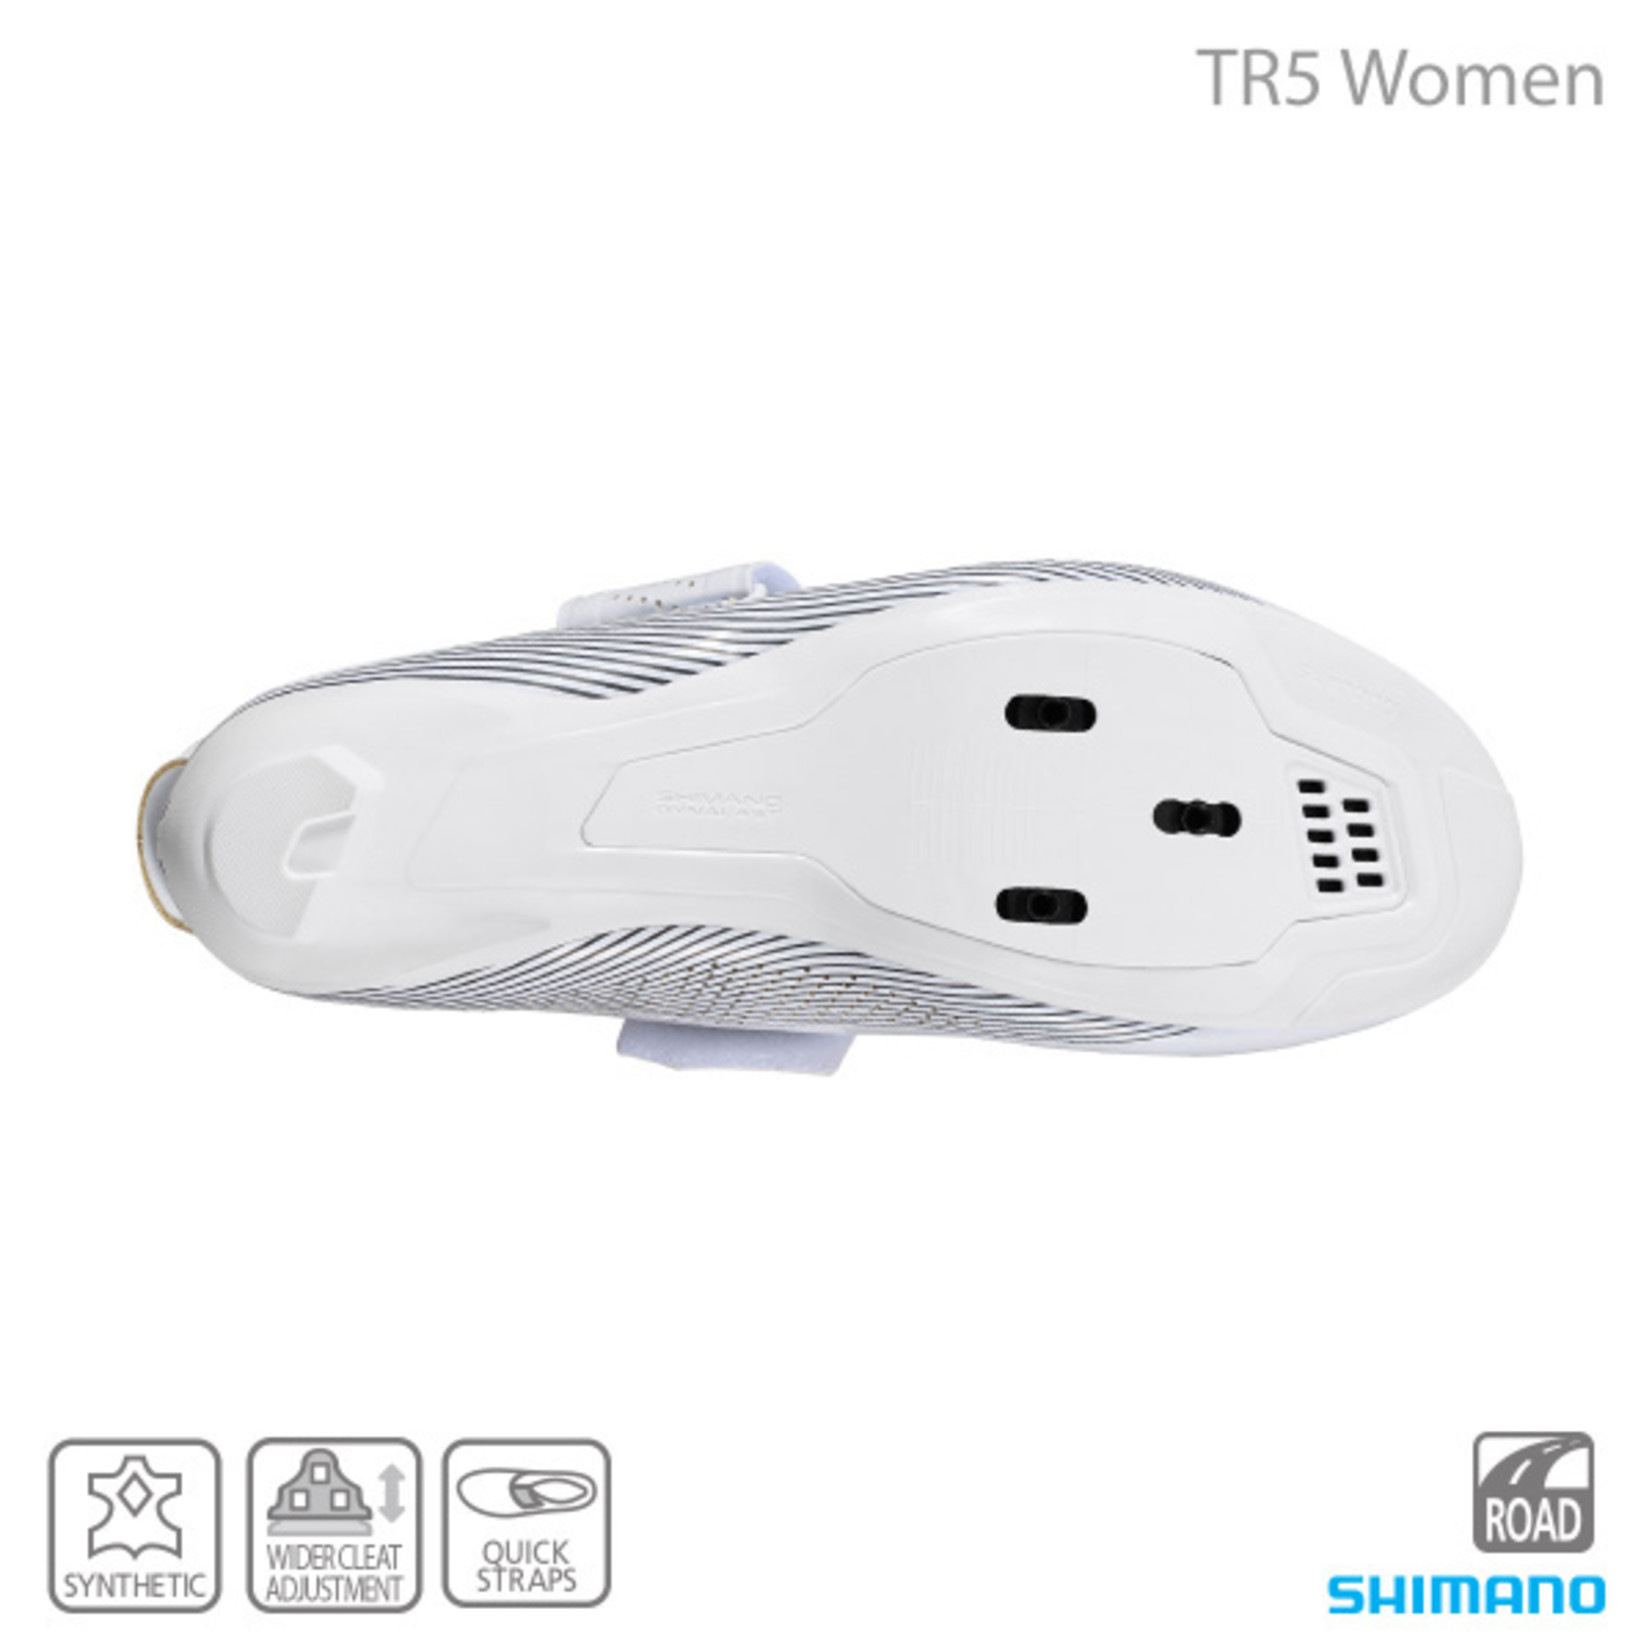 Shimano Shimano SH-TR501 Women's  - White Advanced Fit And Performance Technology